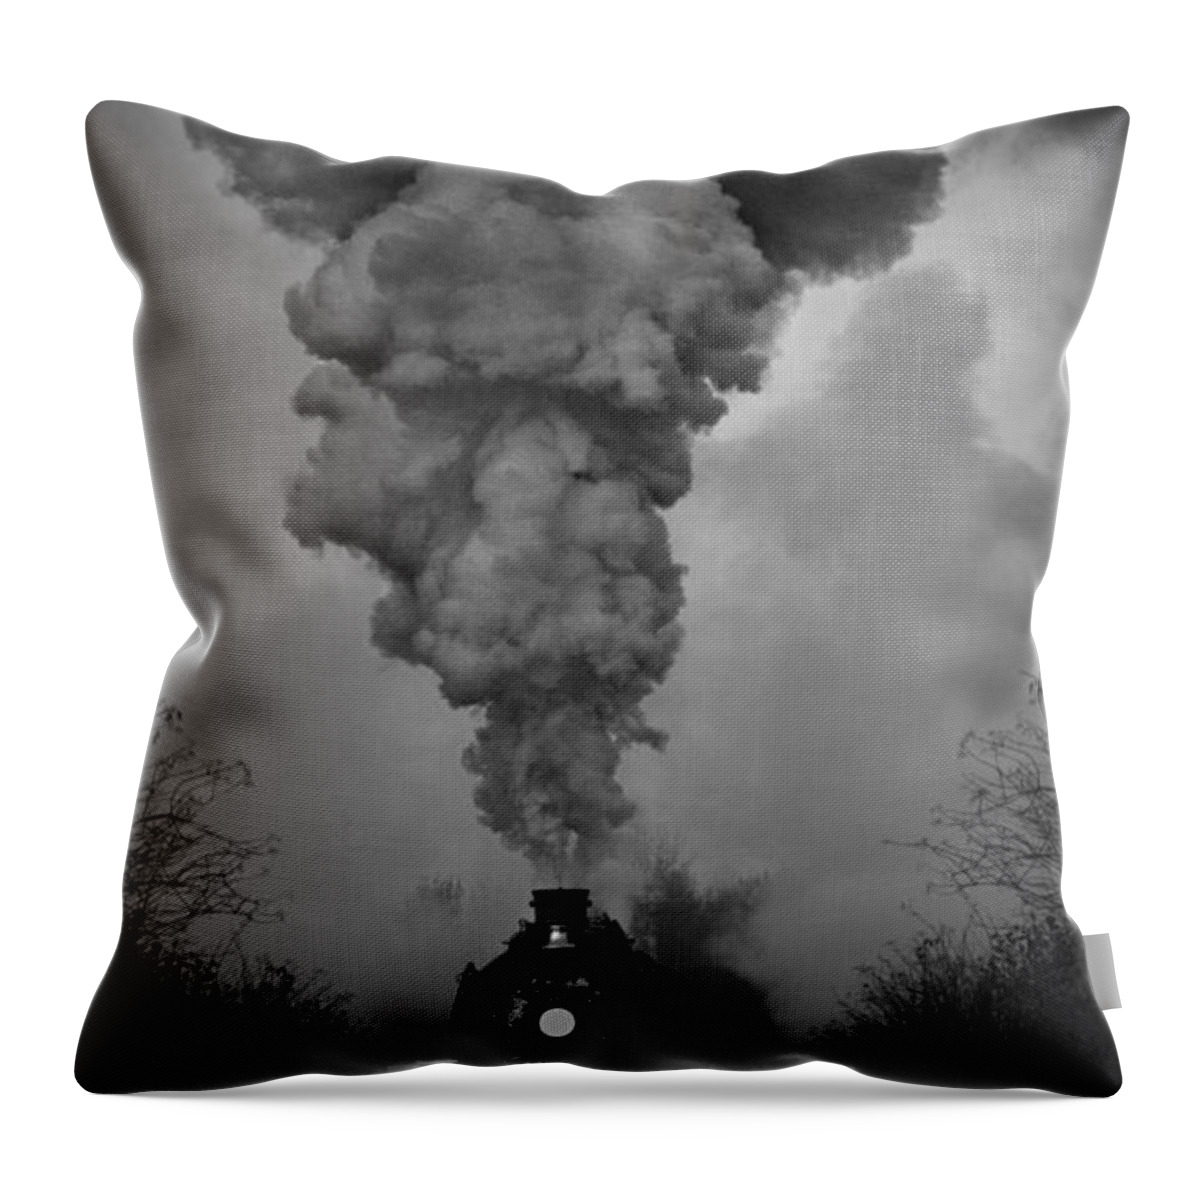 Old Time Steam Locomotive Throw Pillow featuring the photograph Old Time Steam Locomotive by Wes and Dotty Weber